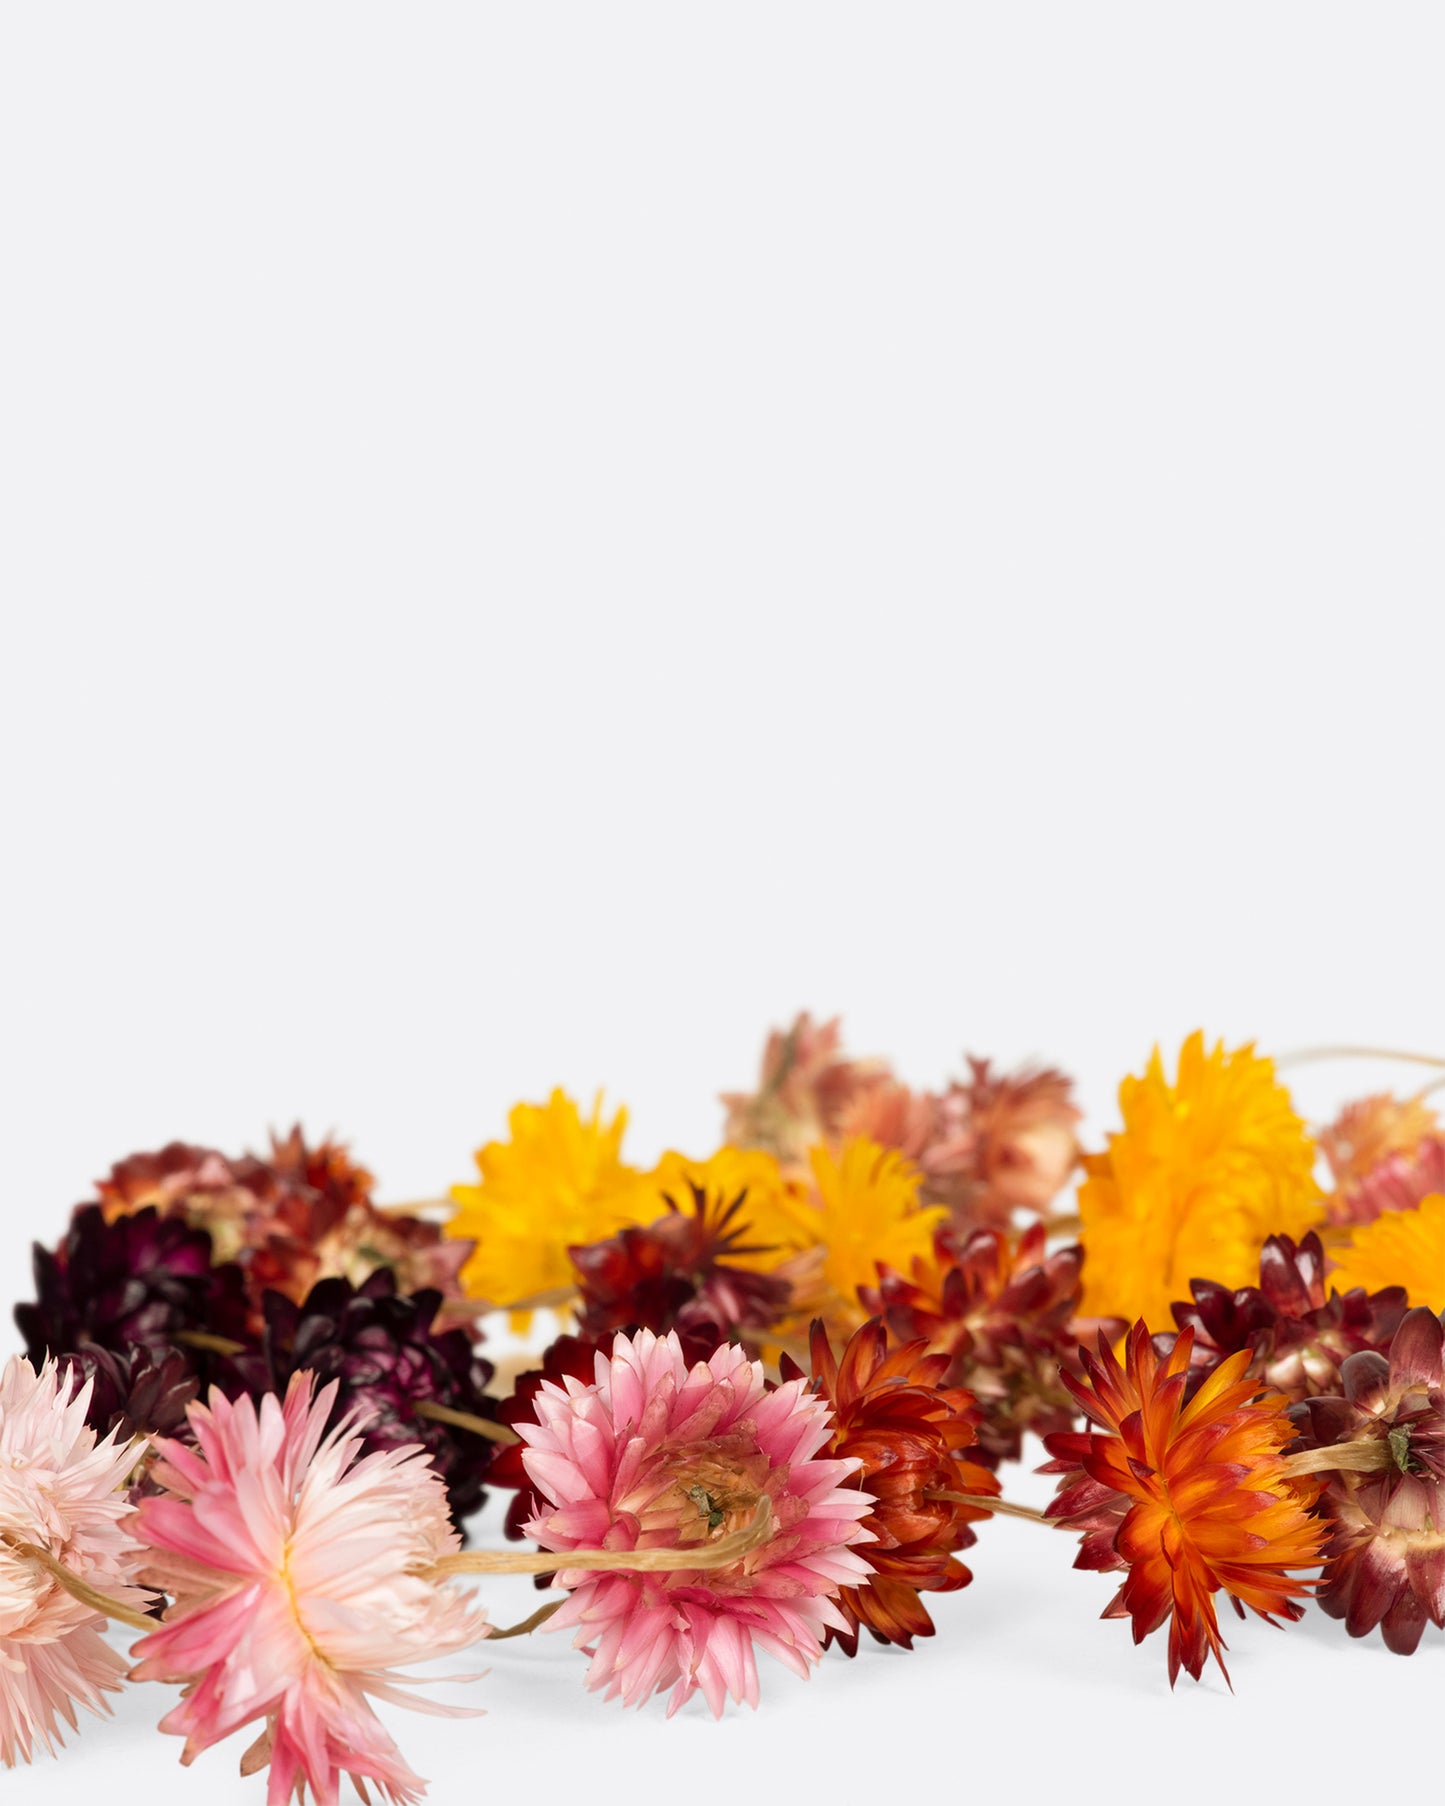 These garlands are hand strung and knotted with homegrown strawflowers, sure to brighten any space.